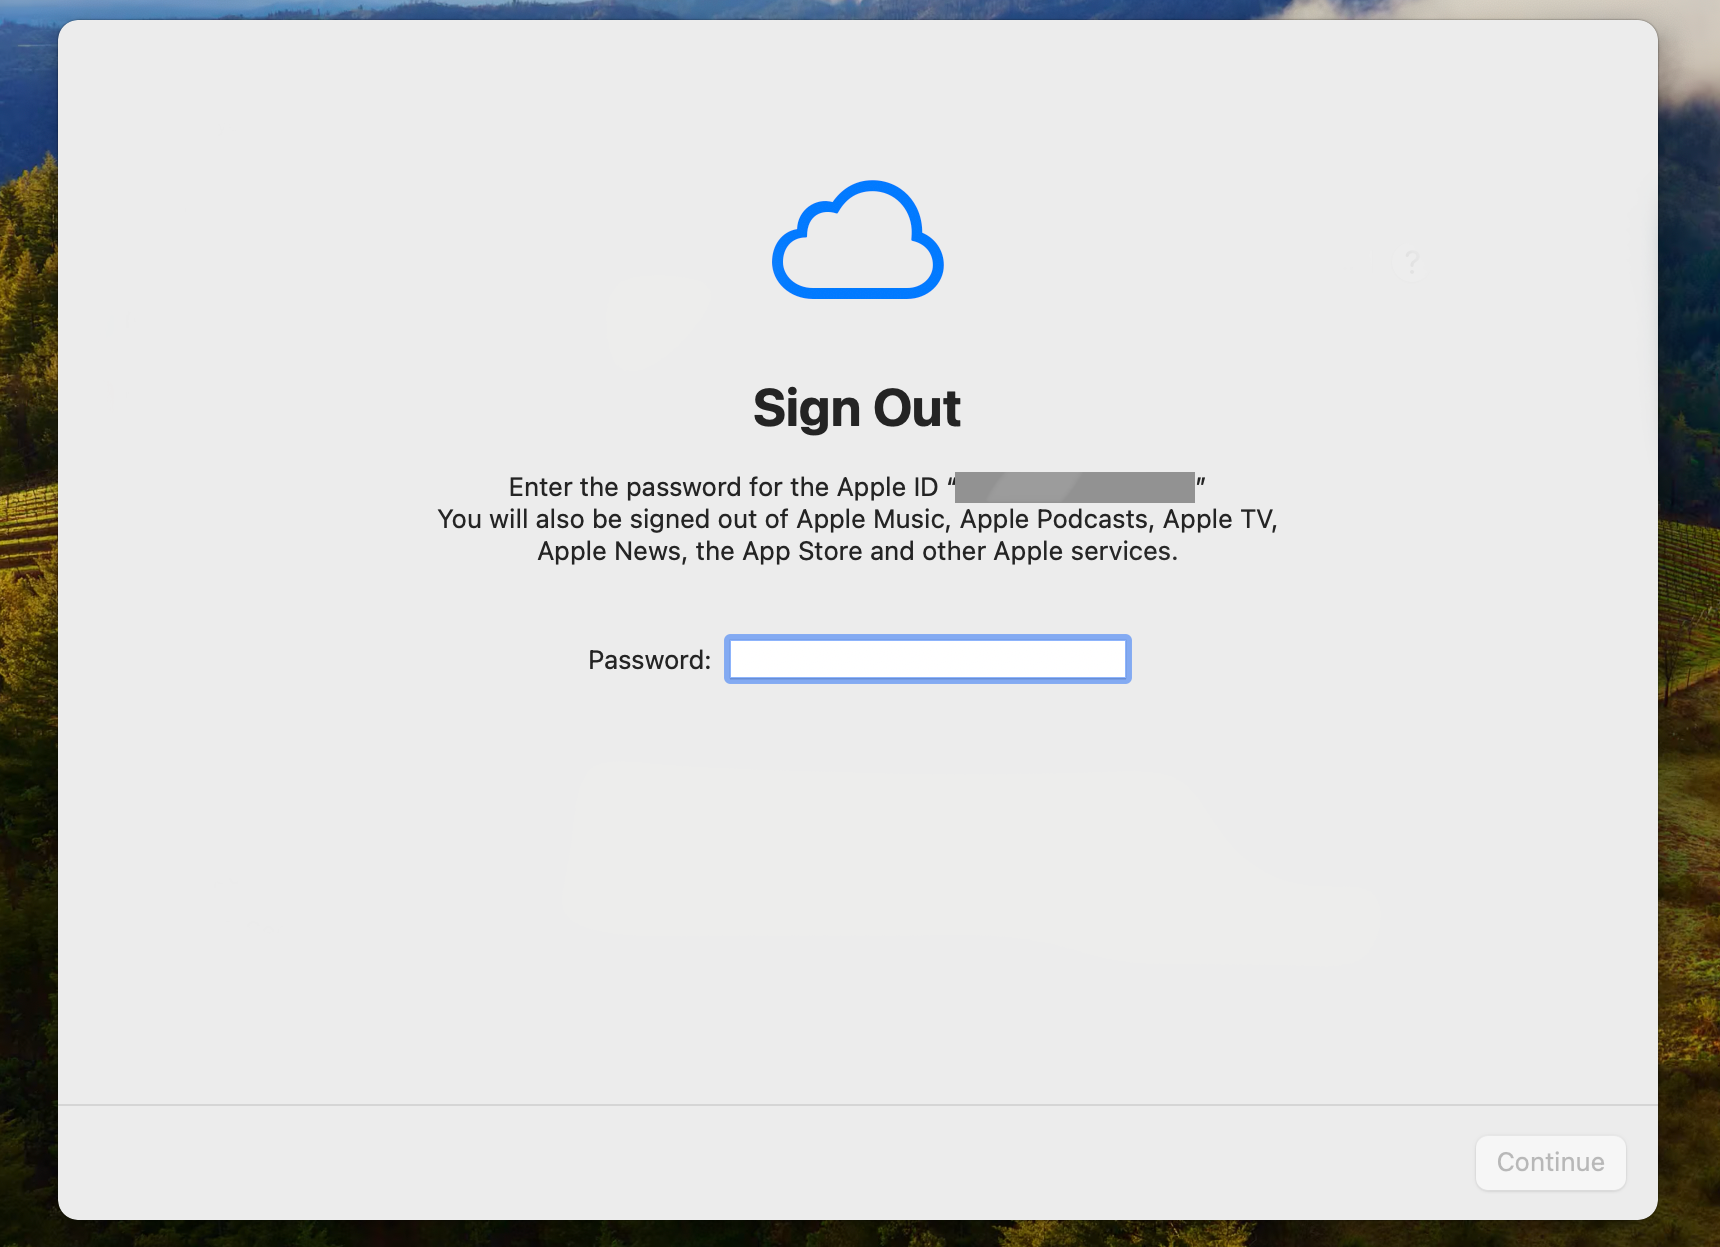 Sign out from your Apple ID.